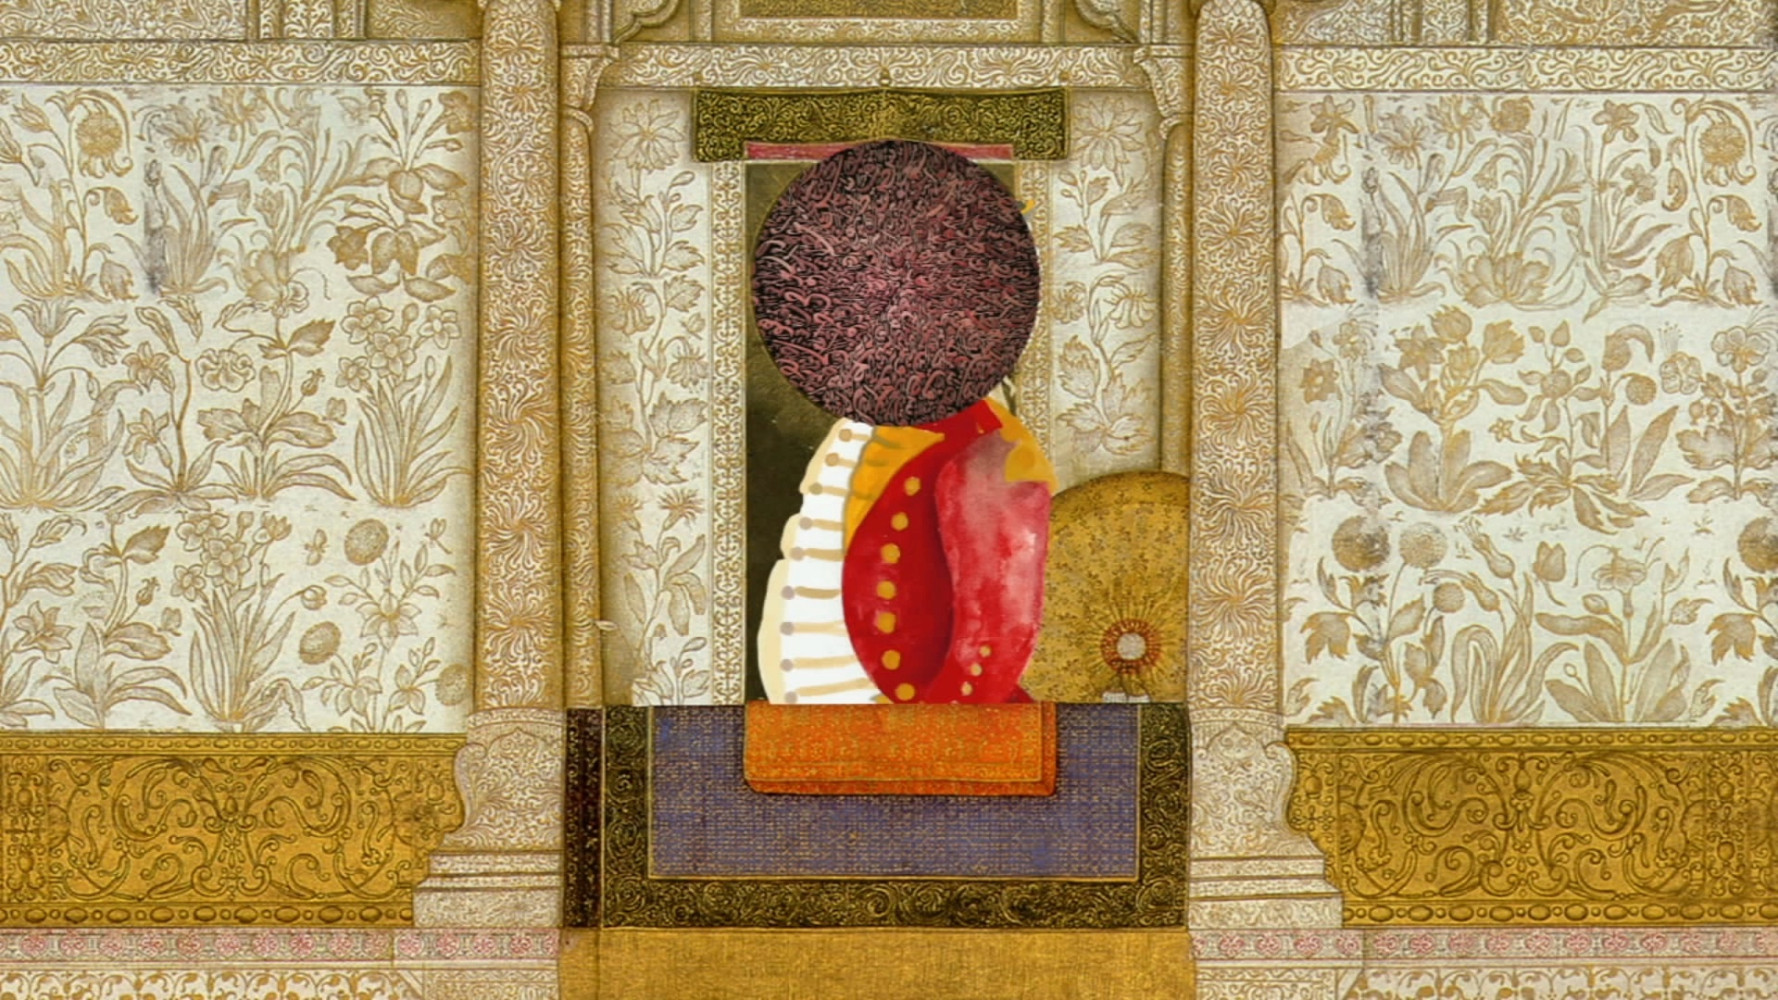 A still from an animated work of a soldier in a 19th century British colonial uniform, who stands in profile against the doorway of a building decorated with floral motifs.